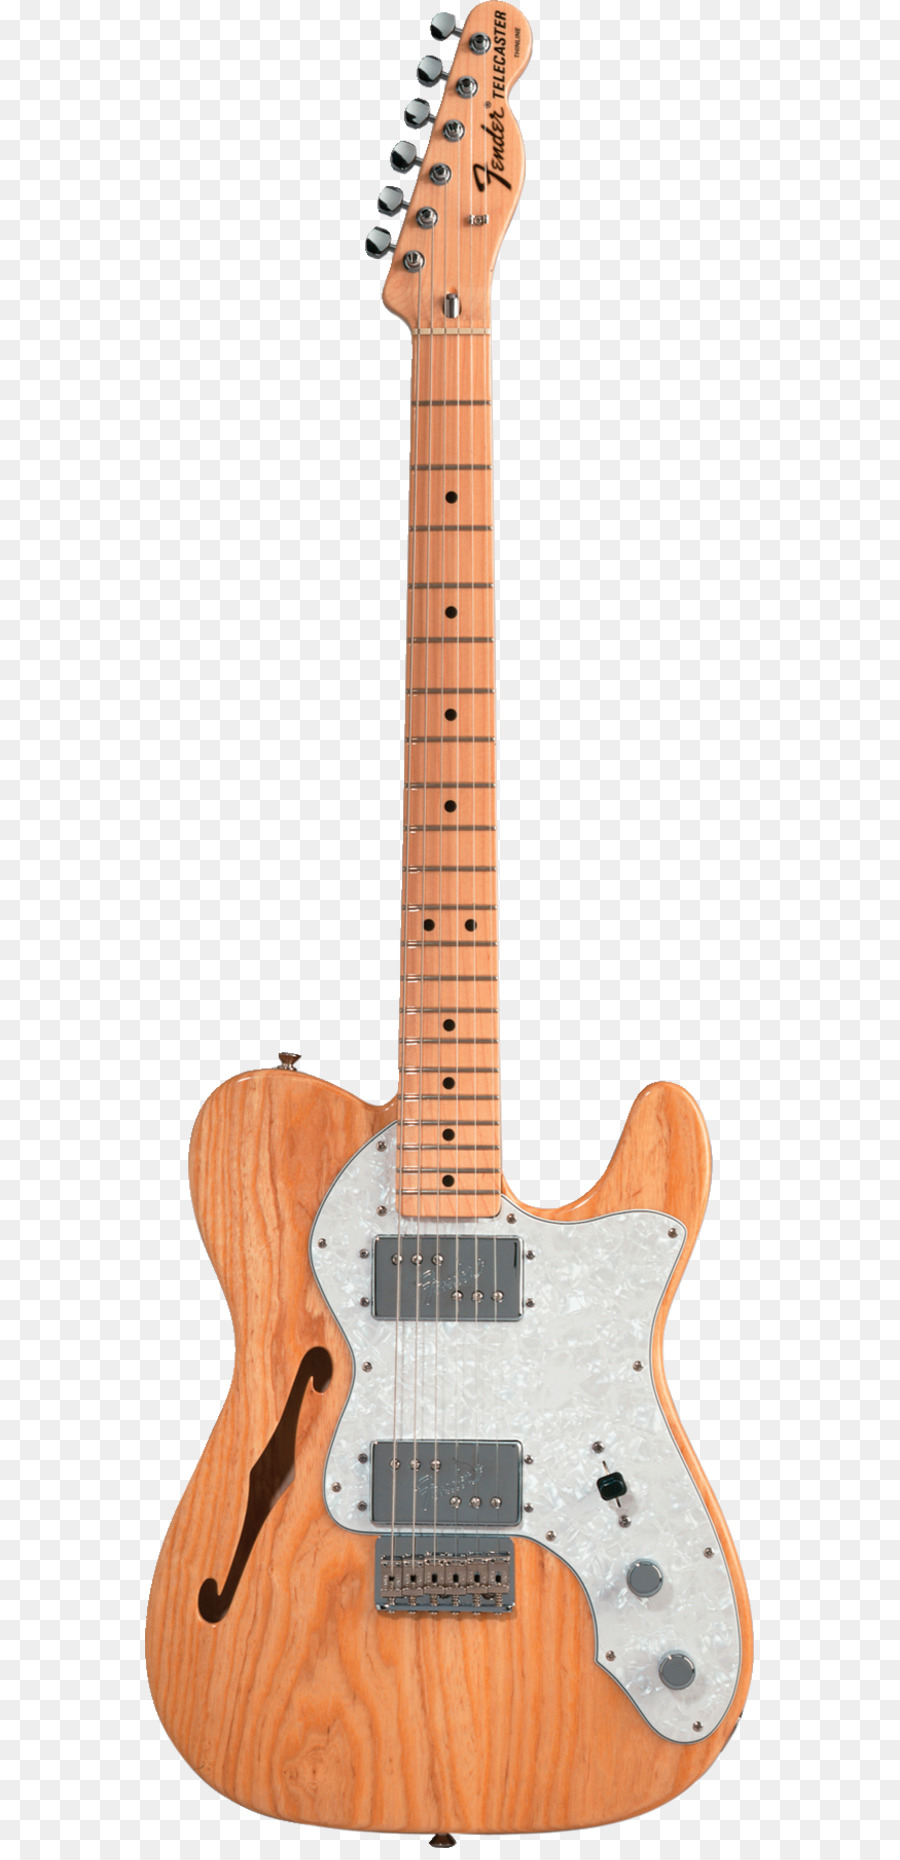 Fender Telecaster Thinline，Fender Classic Series 72 Telecaster Thinline PNG